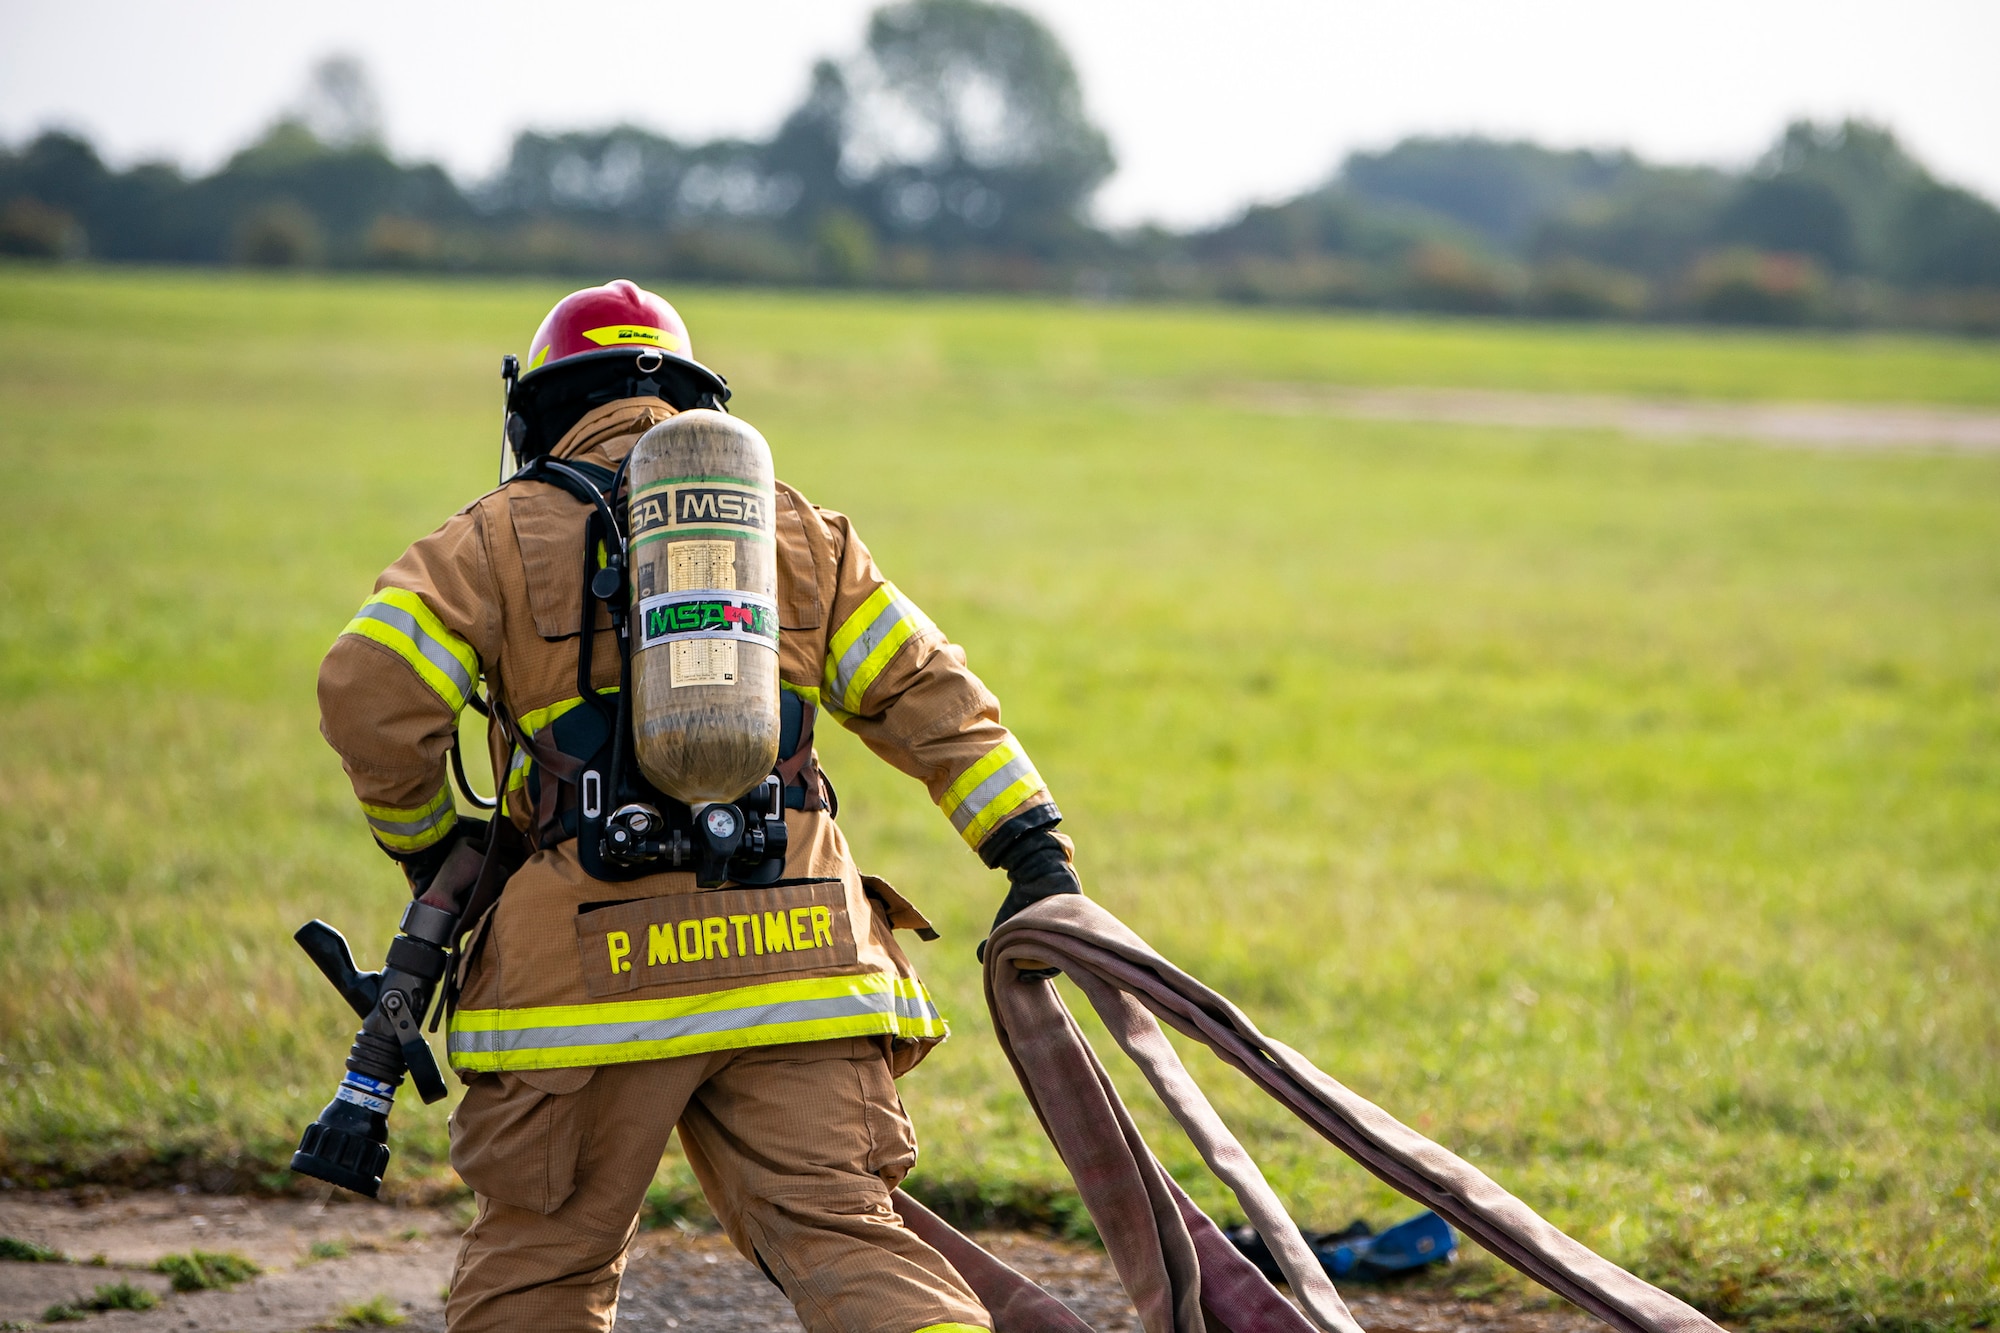 A firefighter from the  422d Fire Emergency Services, pulls a fire hose during a live-fire training exercise at RAF Fairford, England, Oct. 3, 2022. Firefighters from the 422d FES, are required to complete live-fire training bi-annualy to test thief overall readiness and ability to properly extinguish an aircraft fire. (U.S. Air Force photo by Staff Sgt. Eugene Oliver)